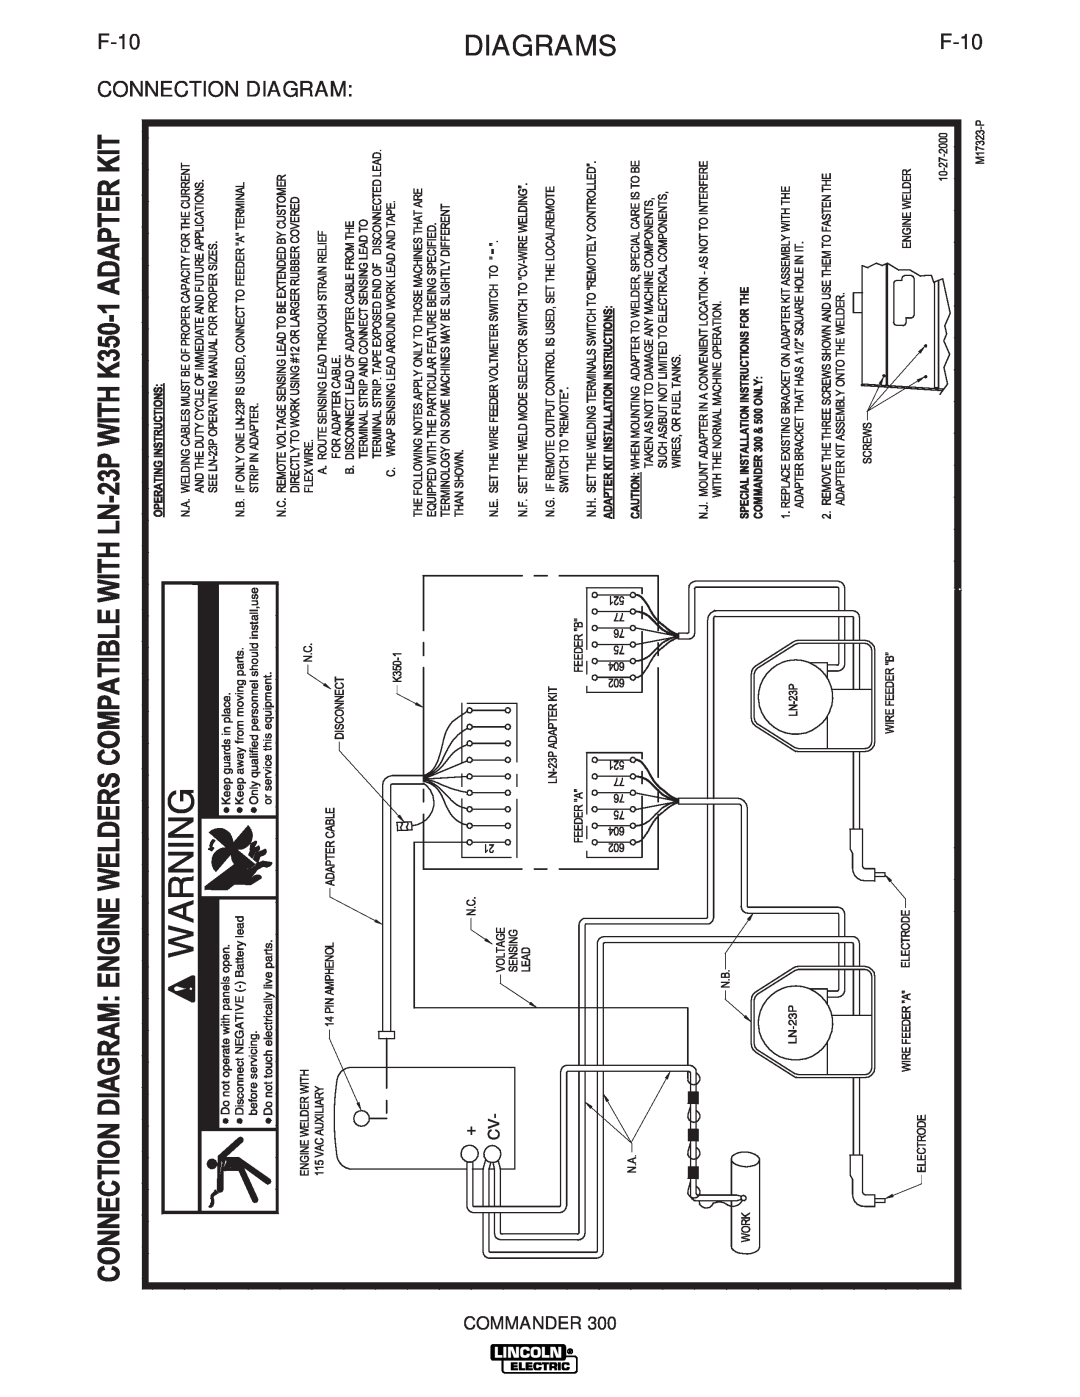 Lincoln Electric IM700-D manual DIAGRAMSF-10, F-10 CONNECTION DIAGRAM, Commander 